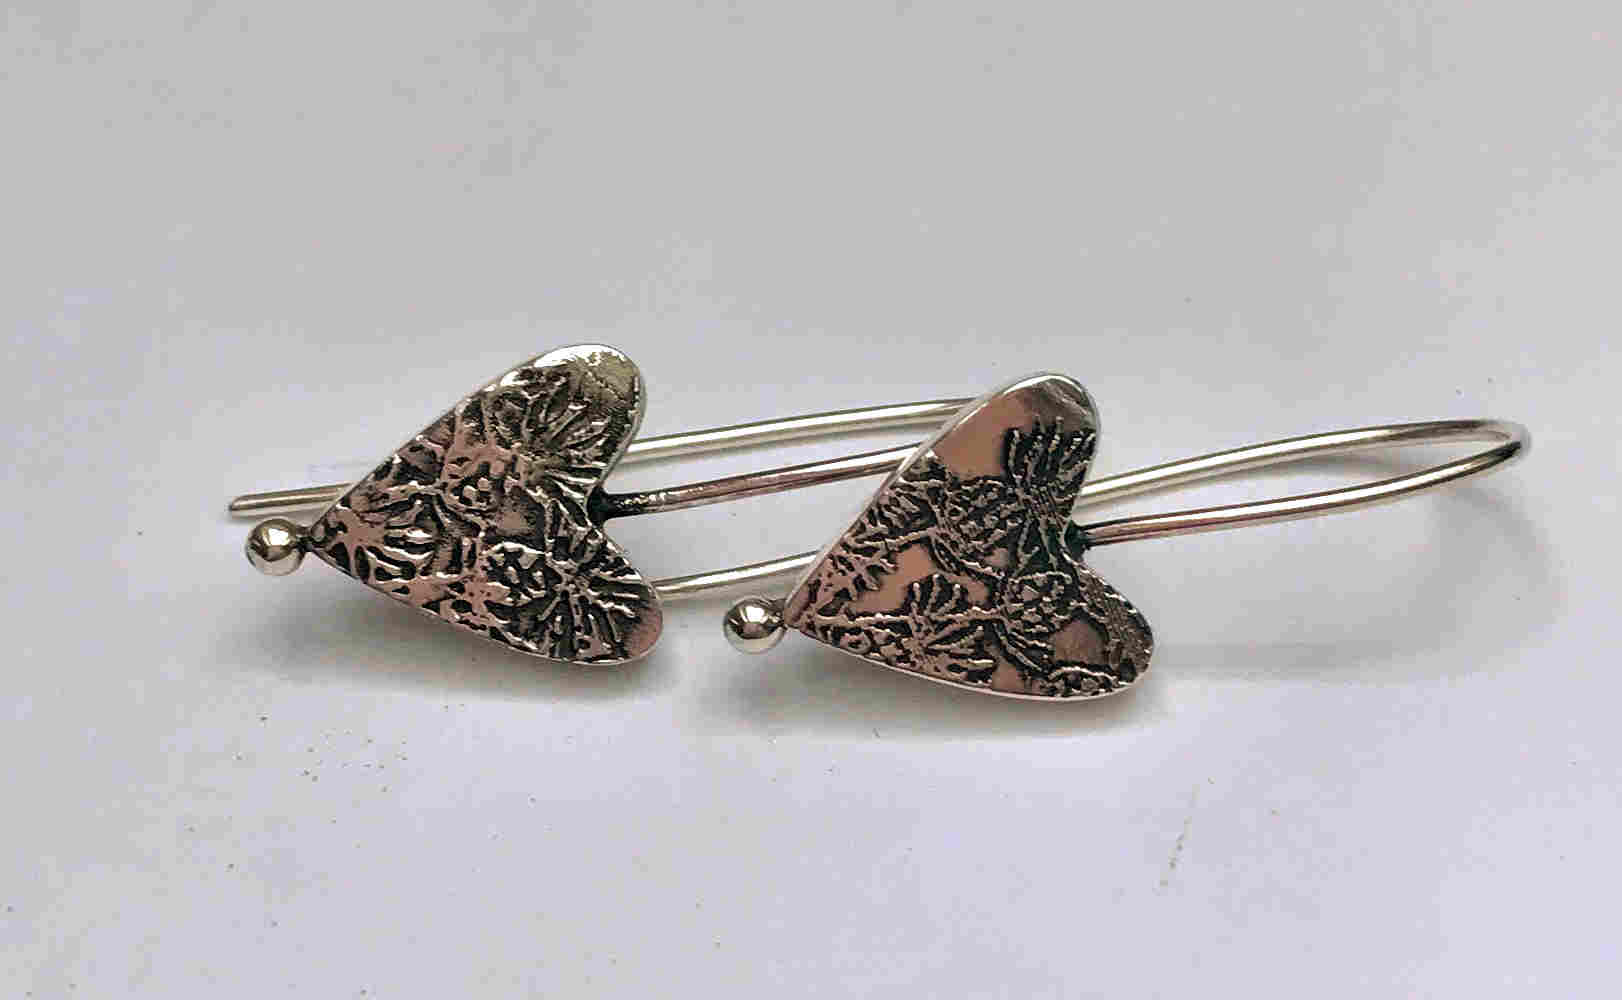 'Sterling Silver Earrings with Etched Thistles' by artist Carol Docherty